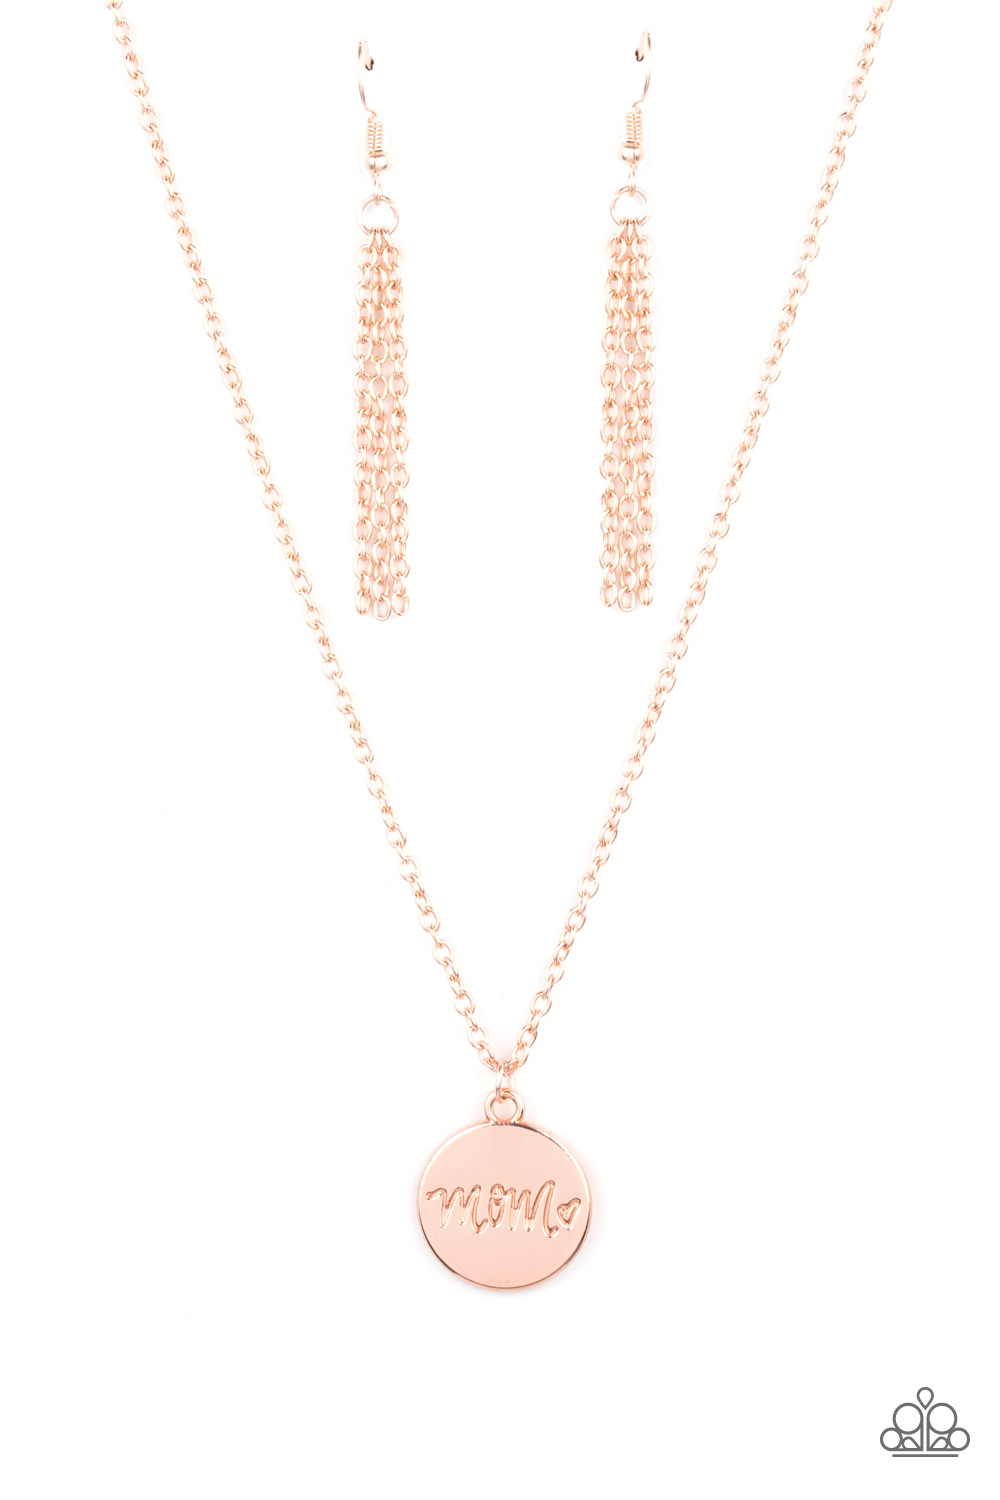 Necklace - The Cool Mom - Rose Gold